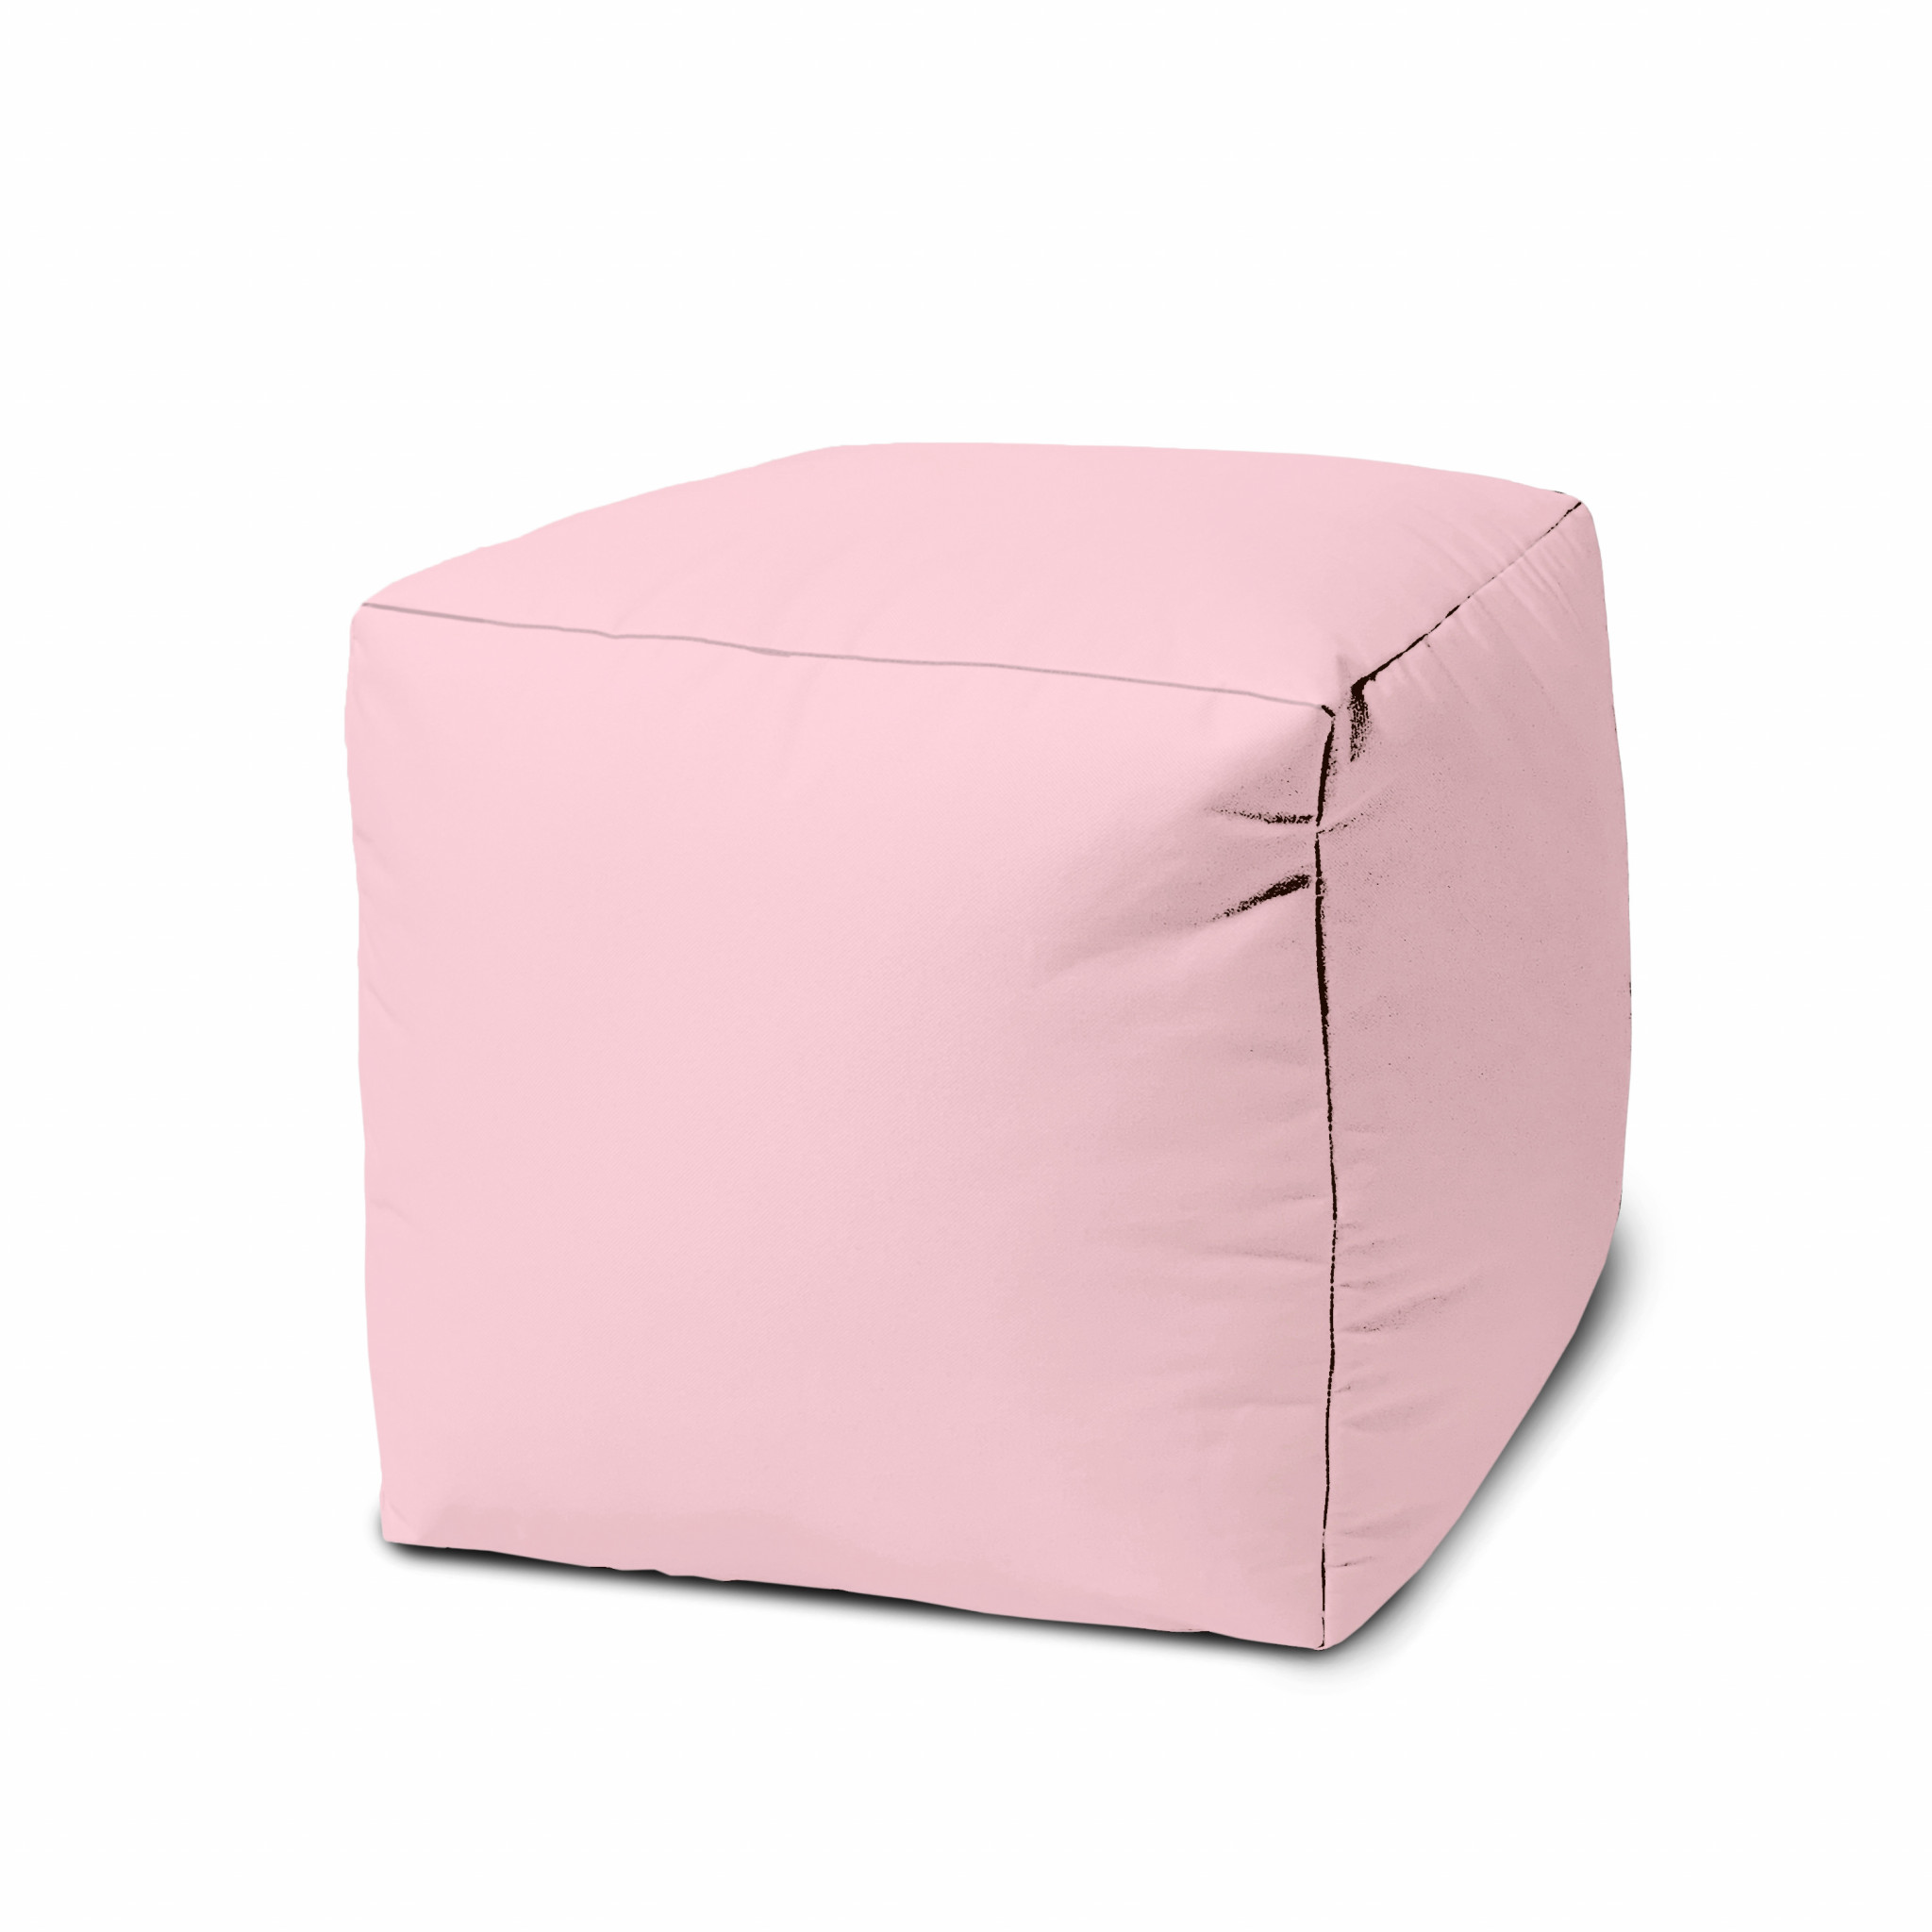 17 Cool Pastel Pink Solid Color Indoor Outdoor Pouf Ottoman